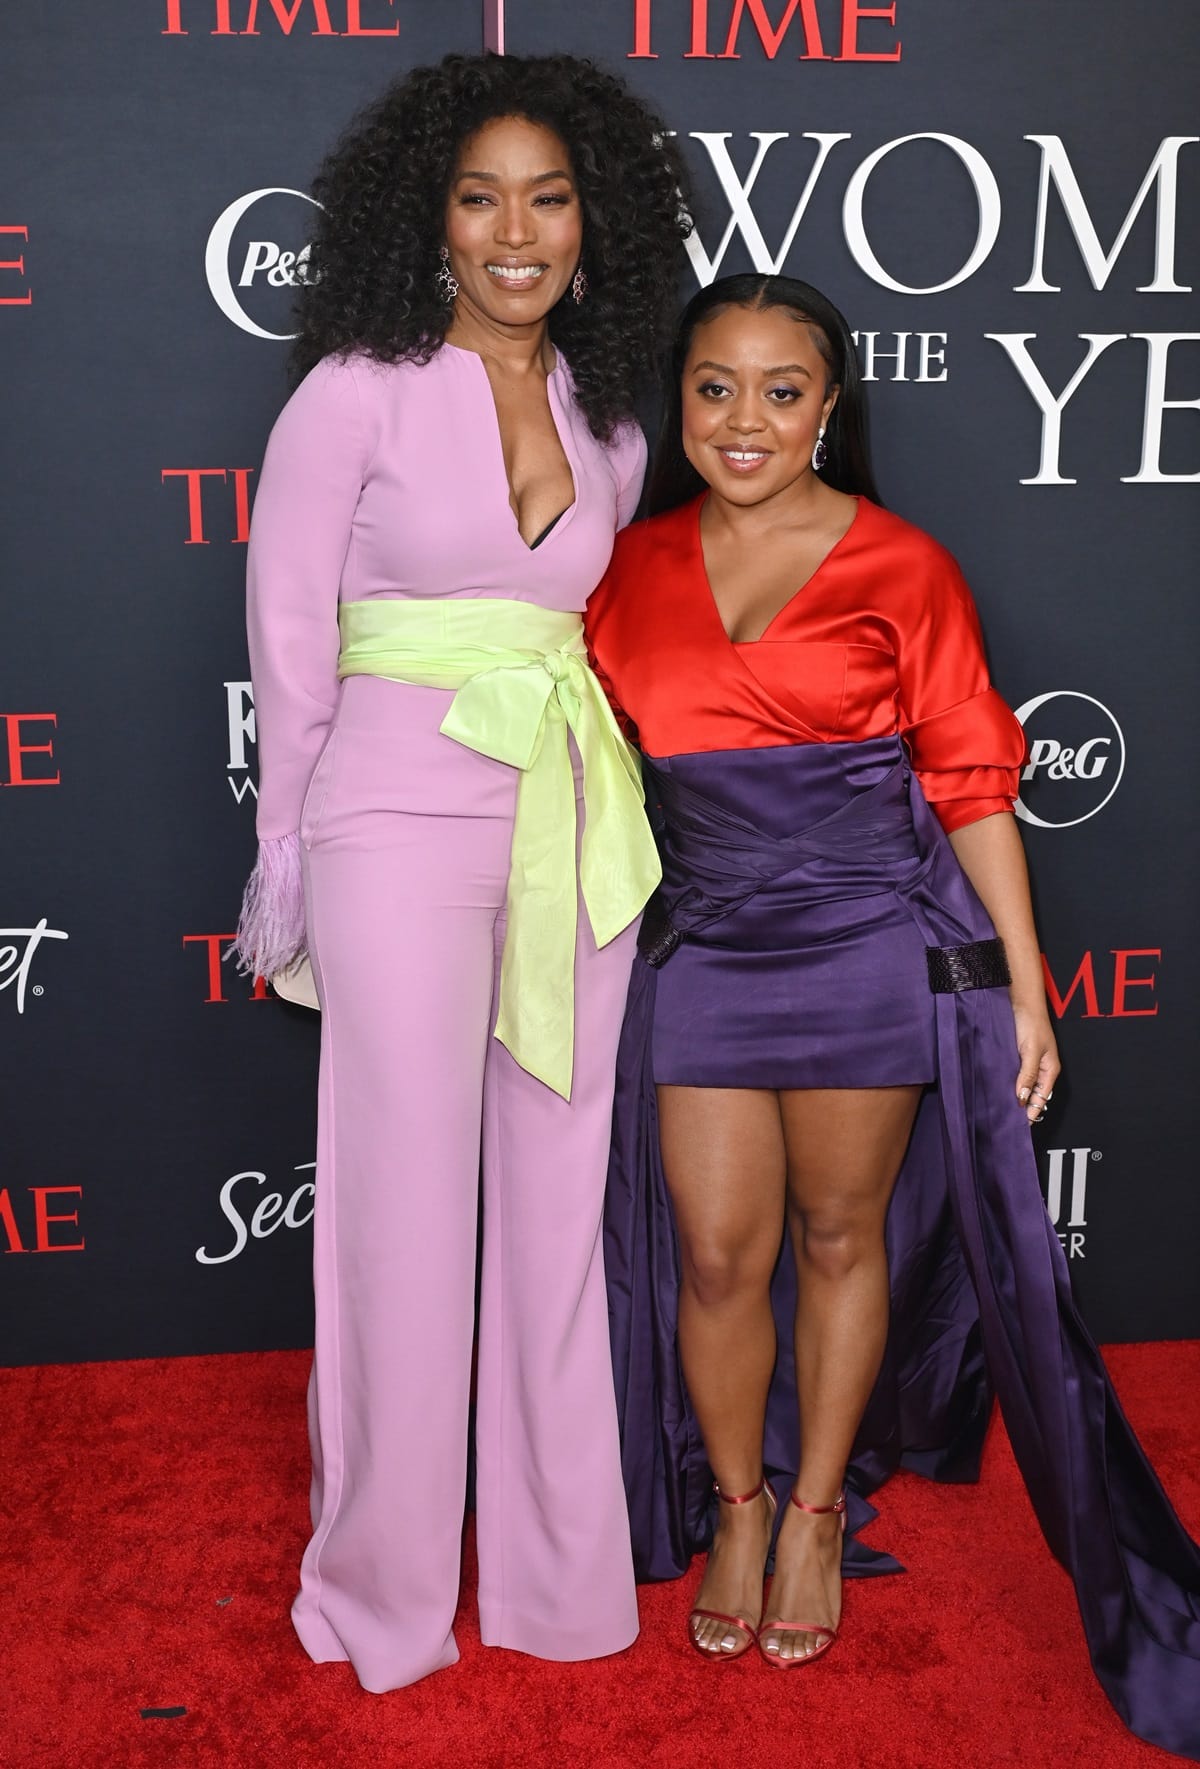 Angela Bassett's height is 5 feet 3.5 inches (161.3 cm), while Quinta Brunson's height is 4 feet 11 inches (149.9 cm), making Angela approximately 4.5 inches (11.4 cm) taller than Quinta